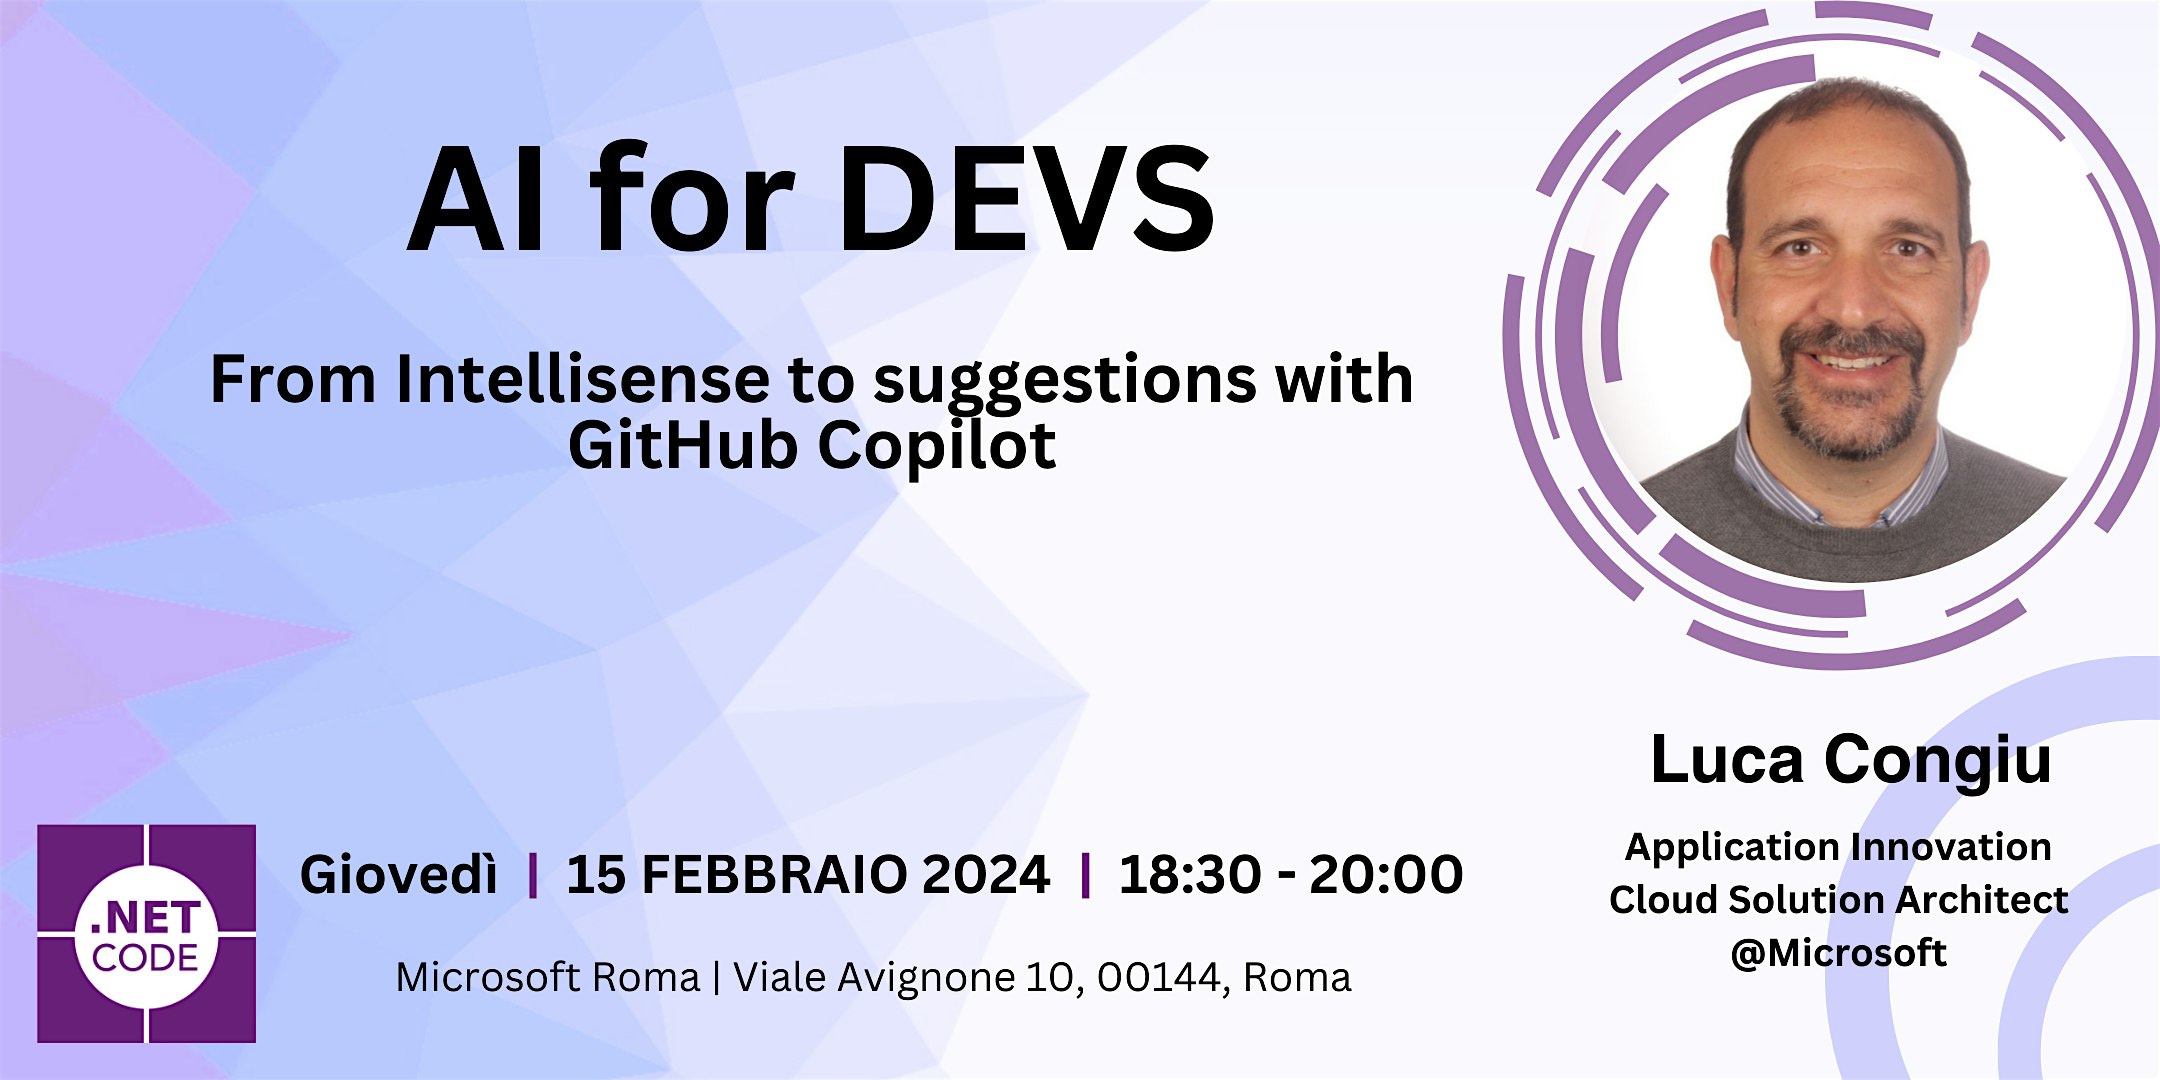 Meetup "AI for DEVS:  From Intellisense to Suggestions with GitHub Copilot"